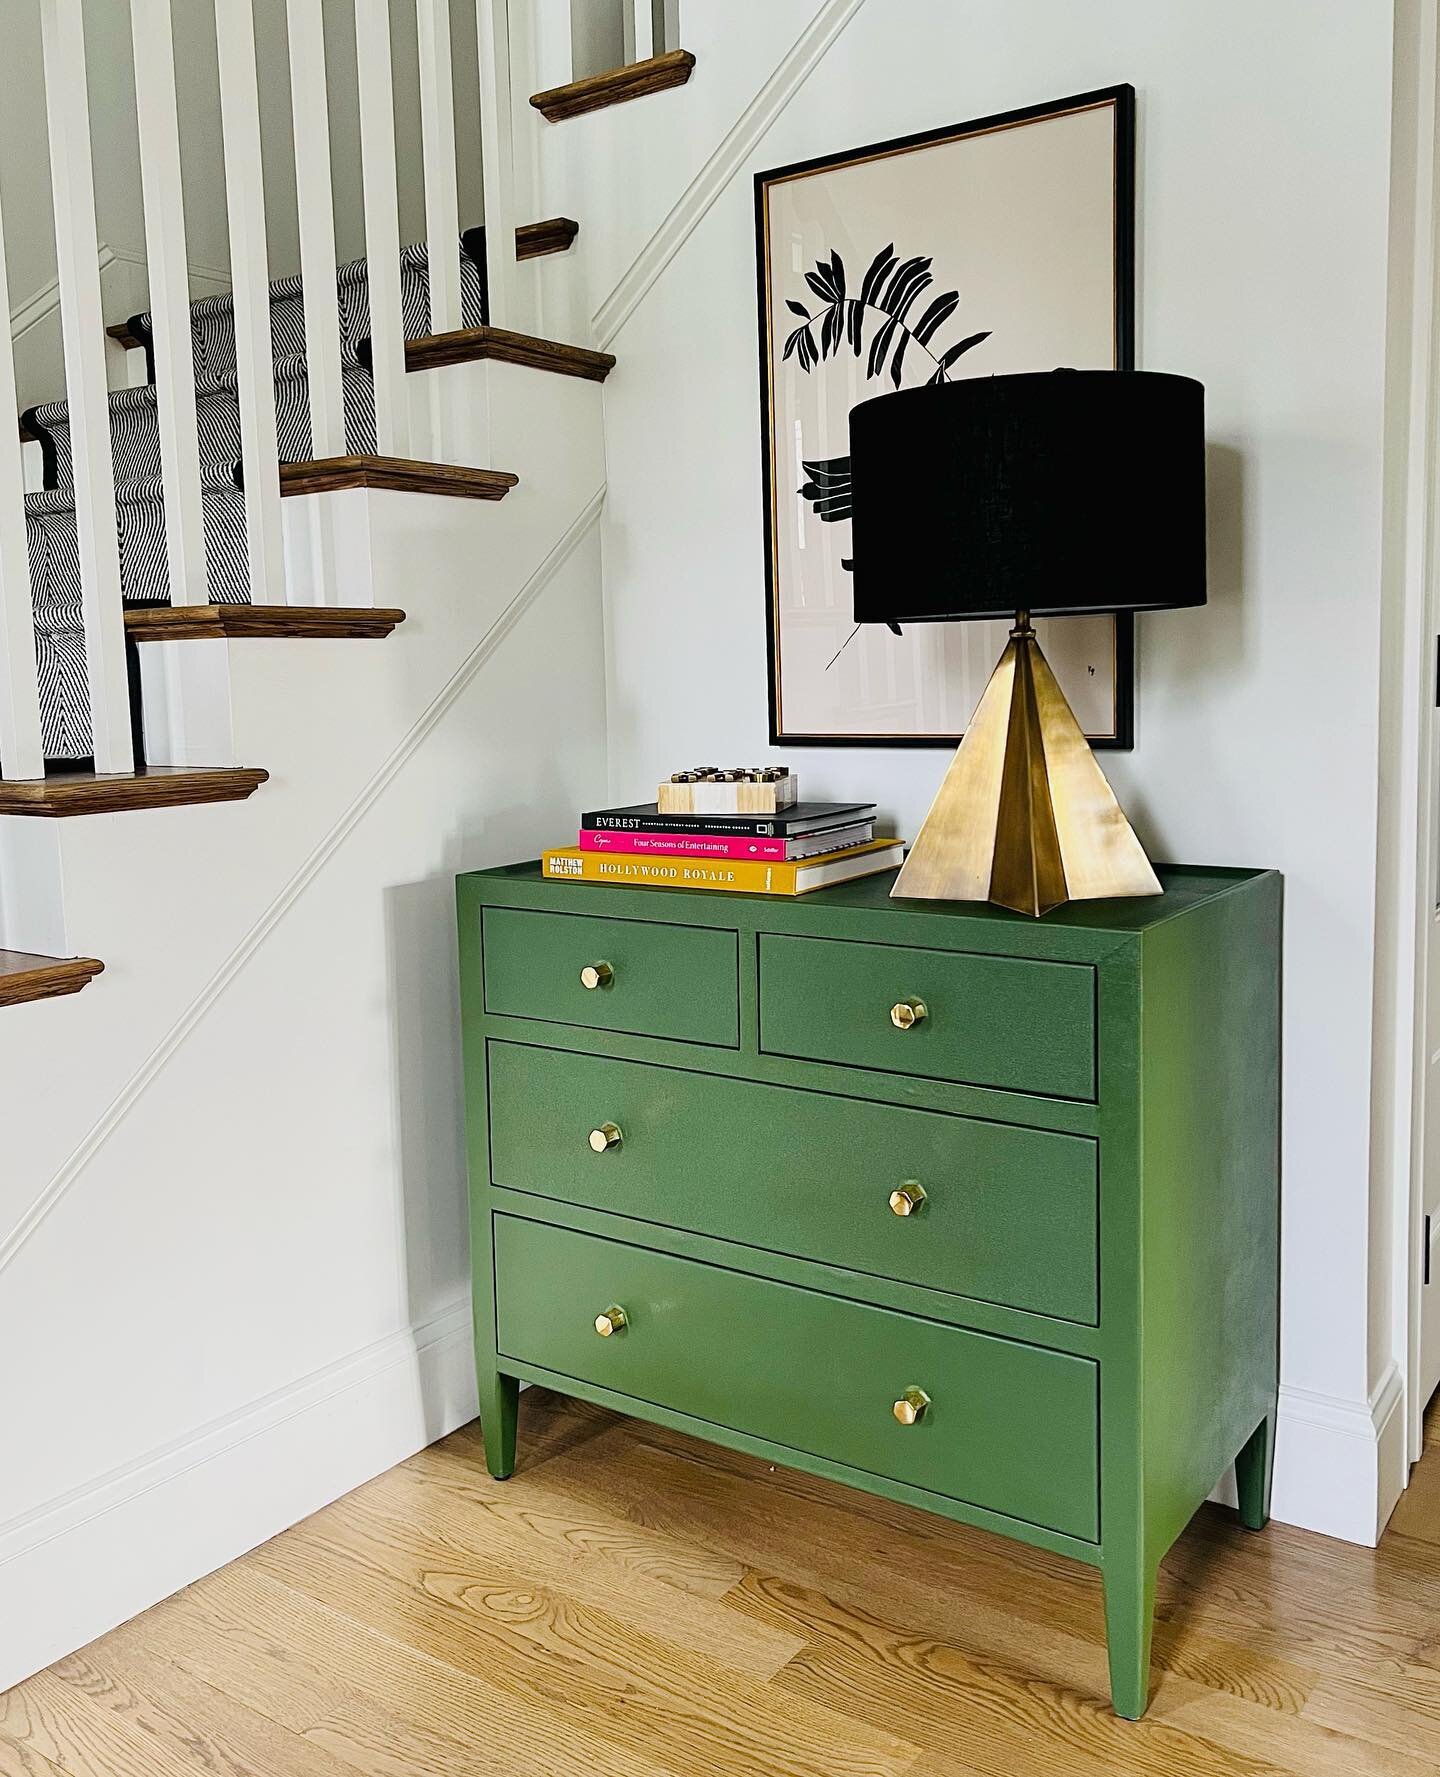 We&rsquo;re green with envy for this preppy classic foyer. A splash of color is always fun and inviting!  @stylehouseboston